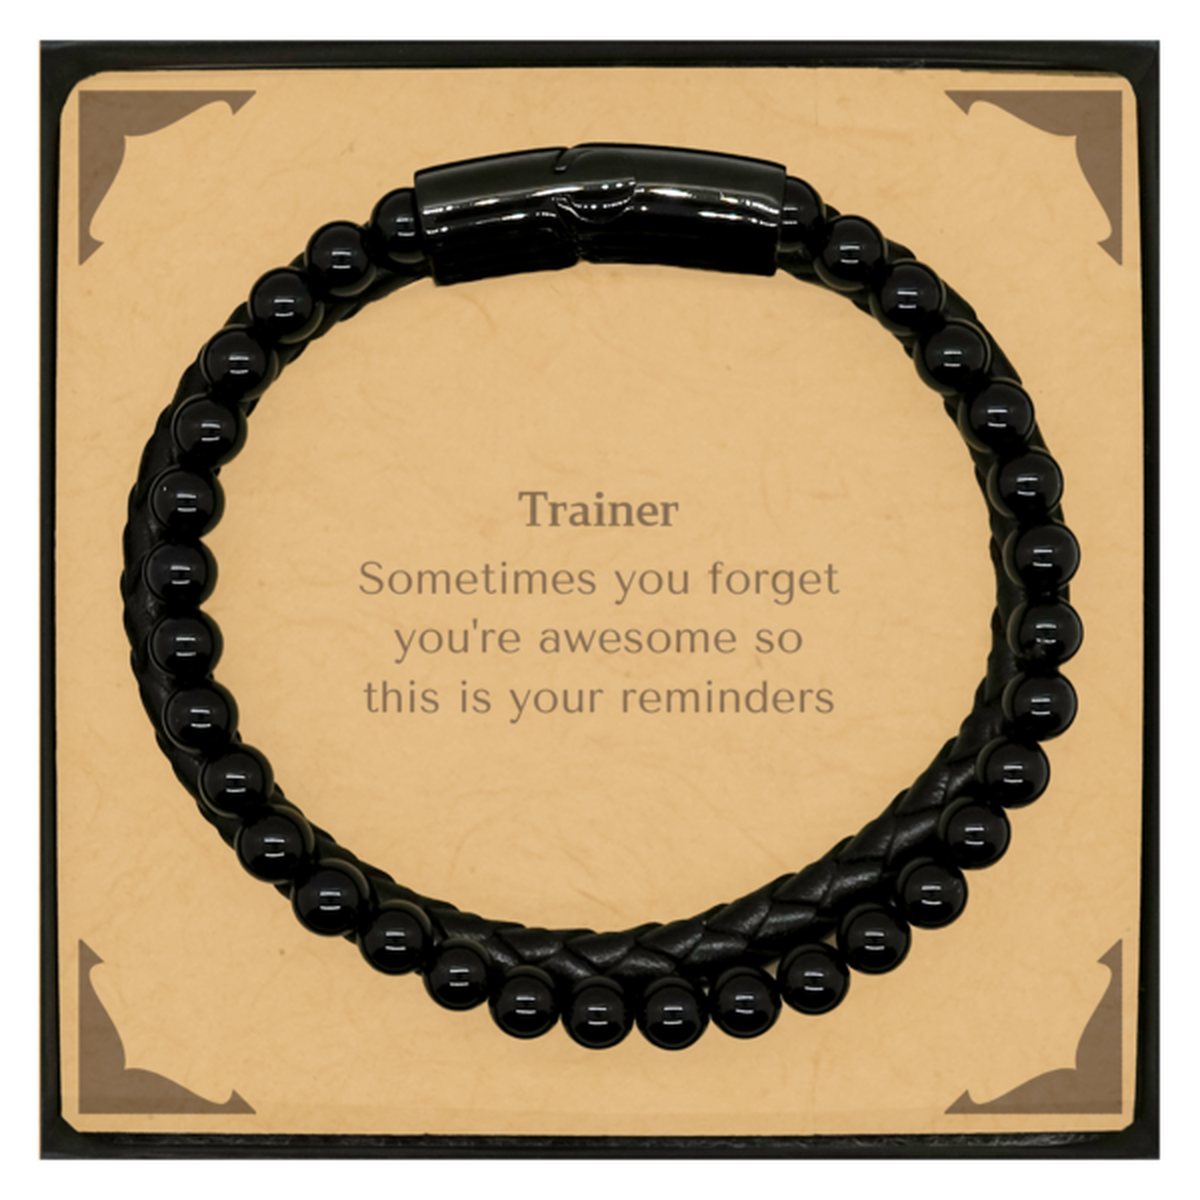 Sentimental Trainer Stone Leather Bracelets, Trainer Sometimes you forget you're awesome so this is your reminders, Graduation Christmas Birthday Gifts for Trainer, Men, Women, Coworkers